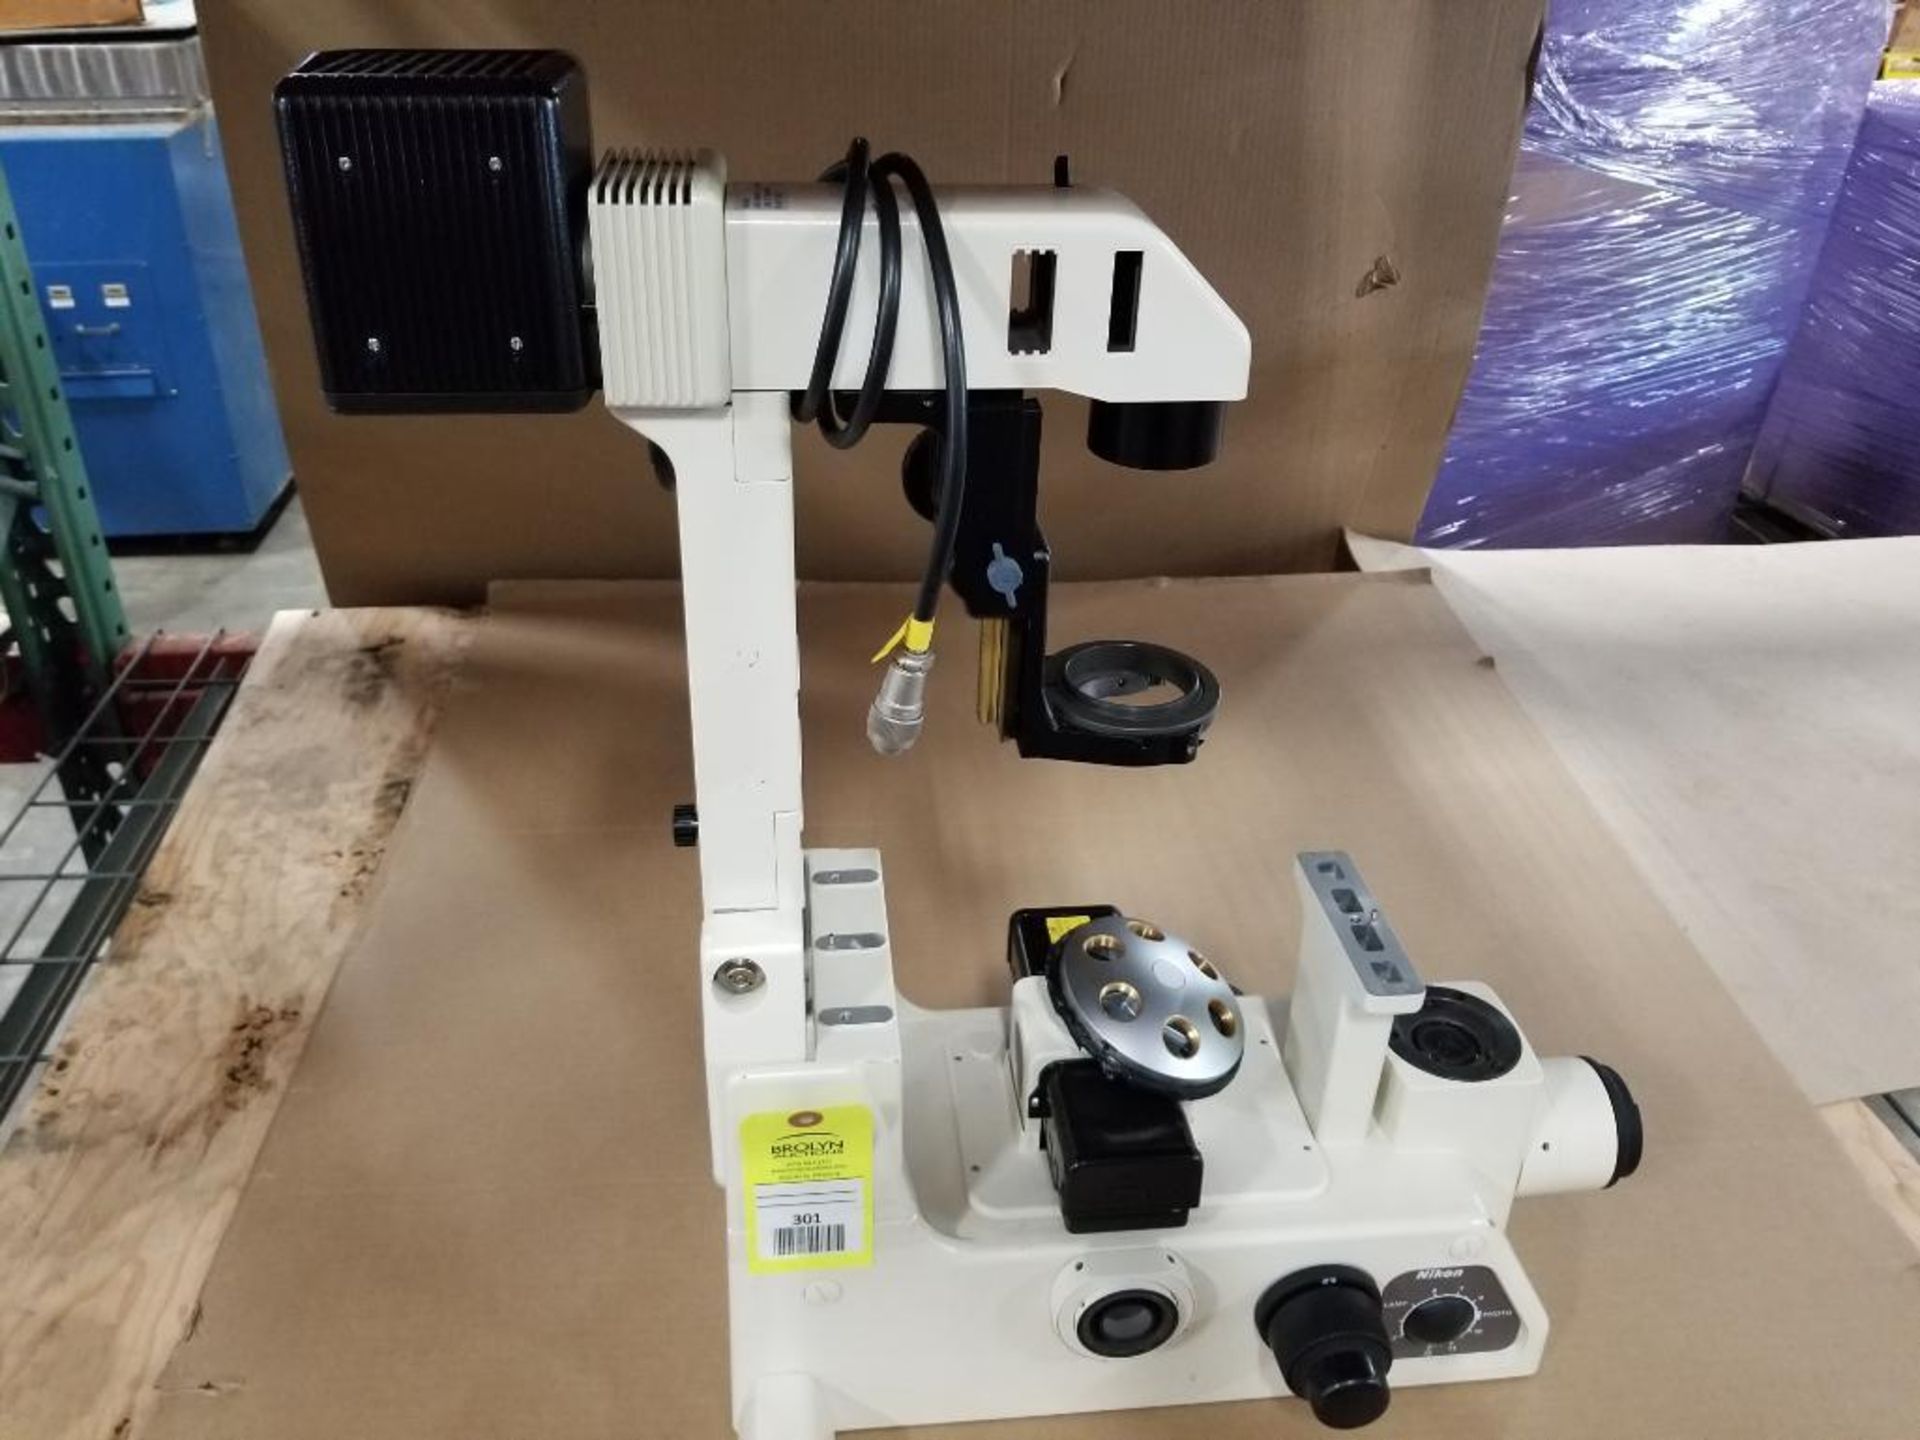 Nikon Diaphot 300 inverted fluorescent phase contrast microscope. S/N:310094